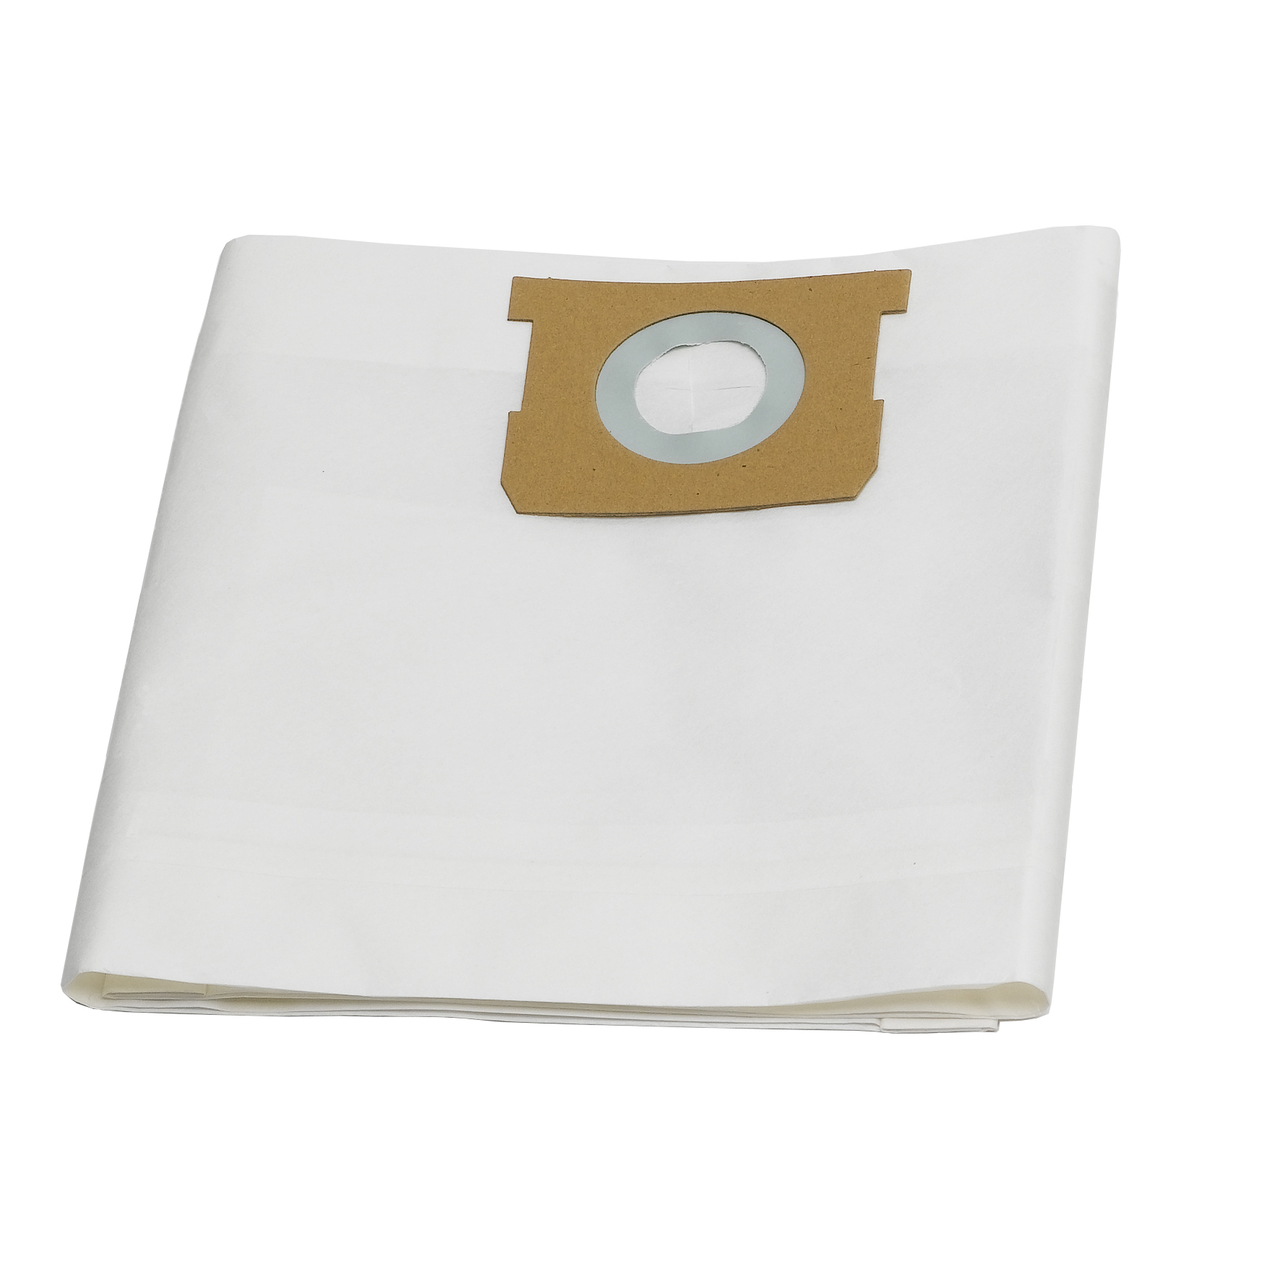 VDBS 5-6 Gallon Dust Filter Bags 3 Pack (works with Shop-Vac)